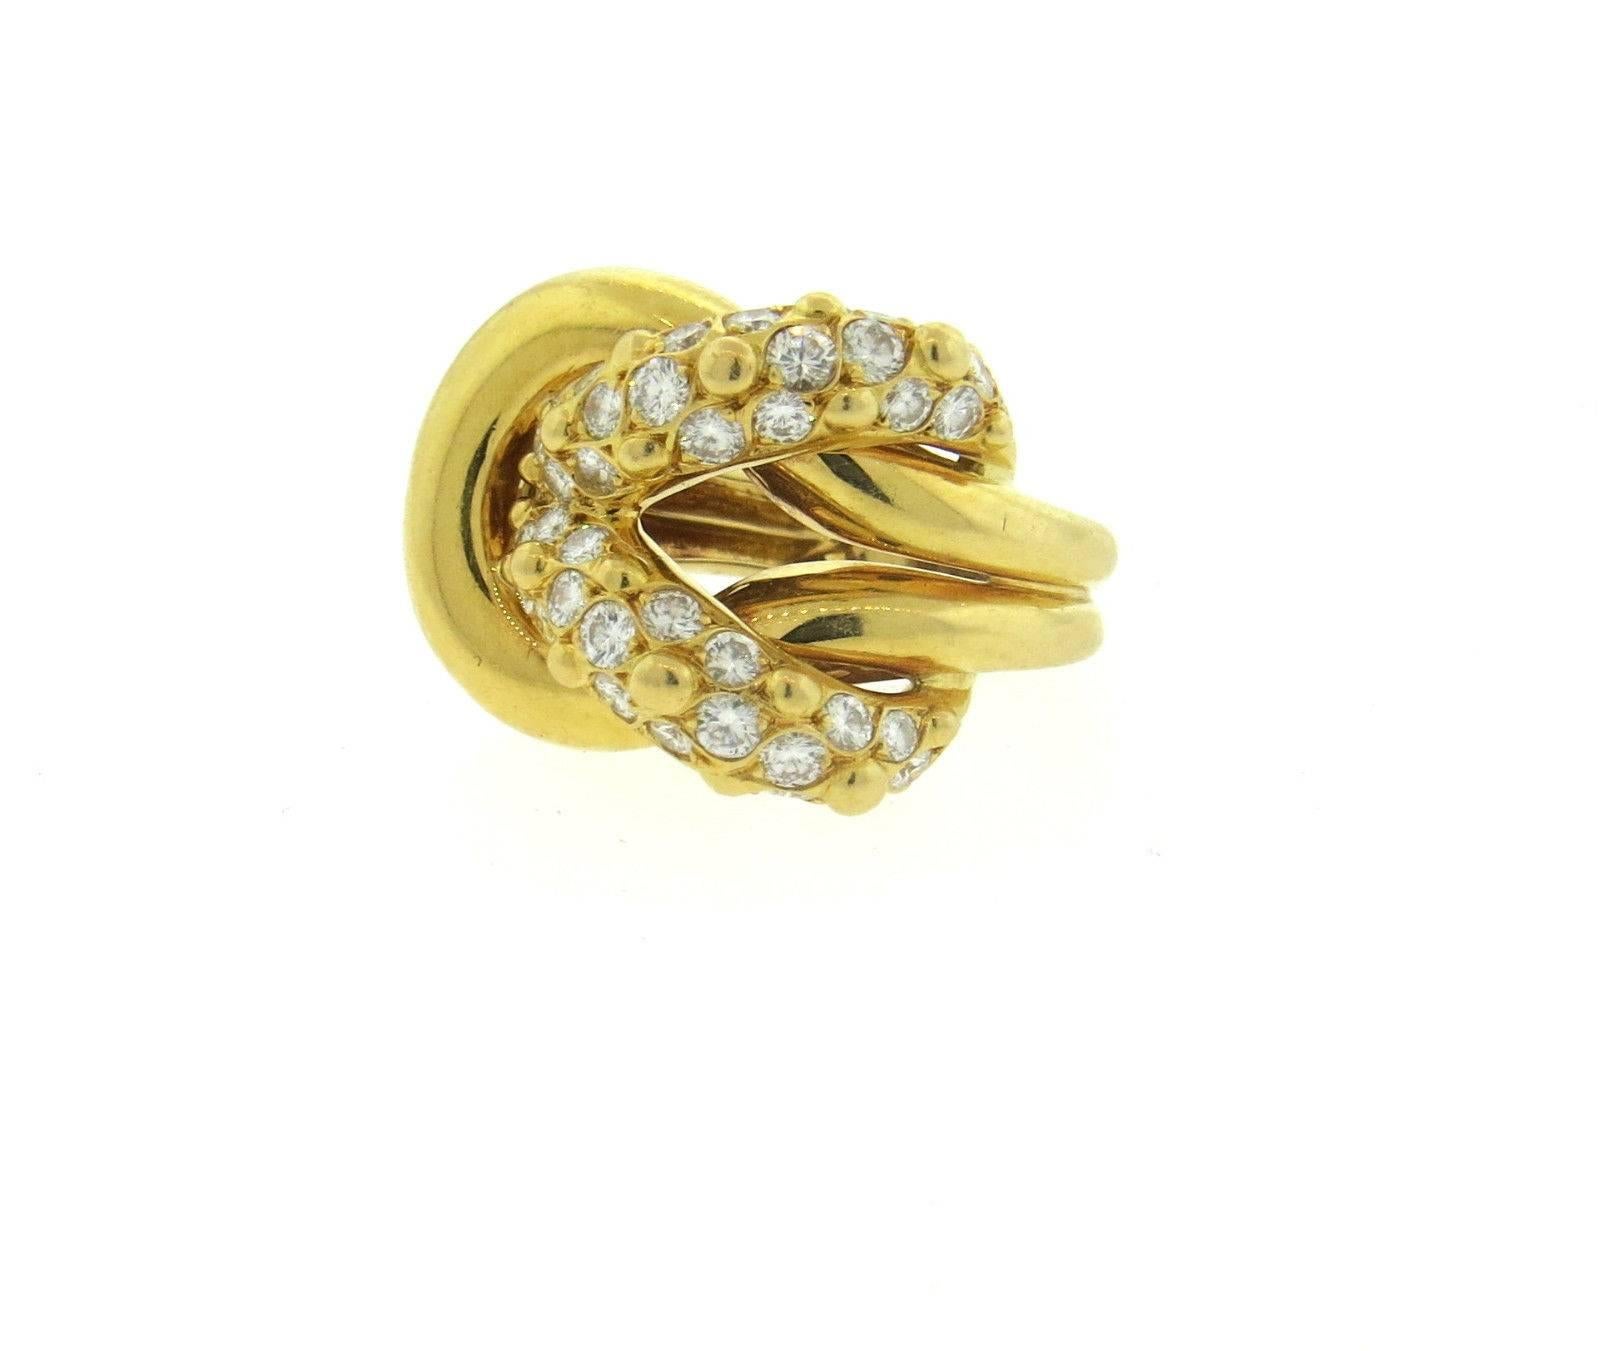 An 18k yellow gold ring set with approximately 1.20ctw of FG/VVS diamonds.  Crafted by Van Cleef & Arpels, the ring is a size 6, ring top is 19mm x 23mm.  Marked: Van Cleef & Arpels, 750, 72, 122245.  The weight of the ring is 13.5 grams.